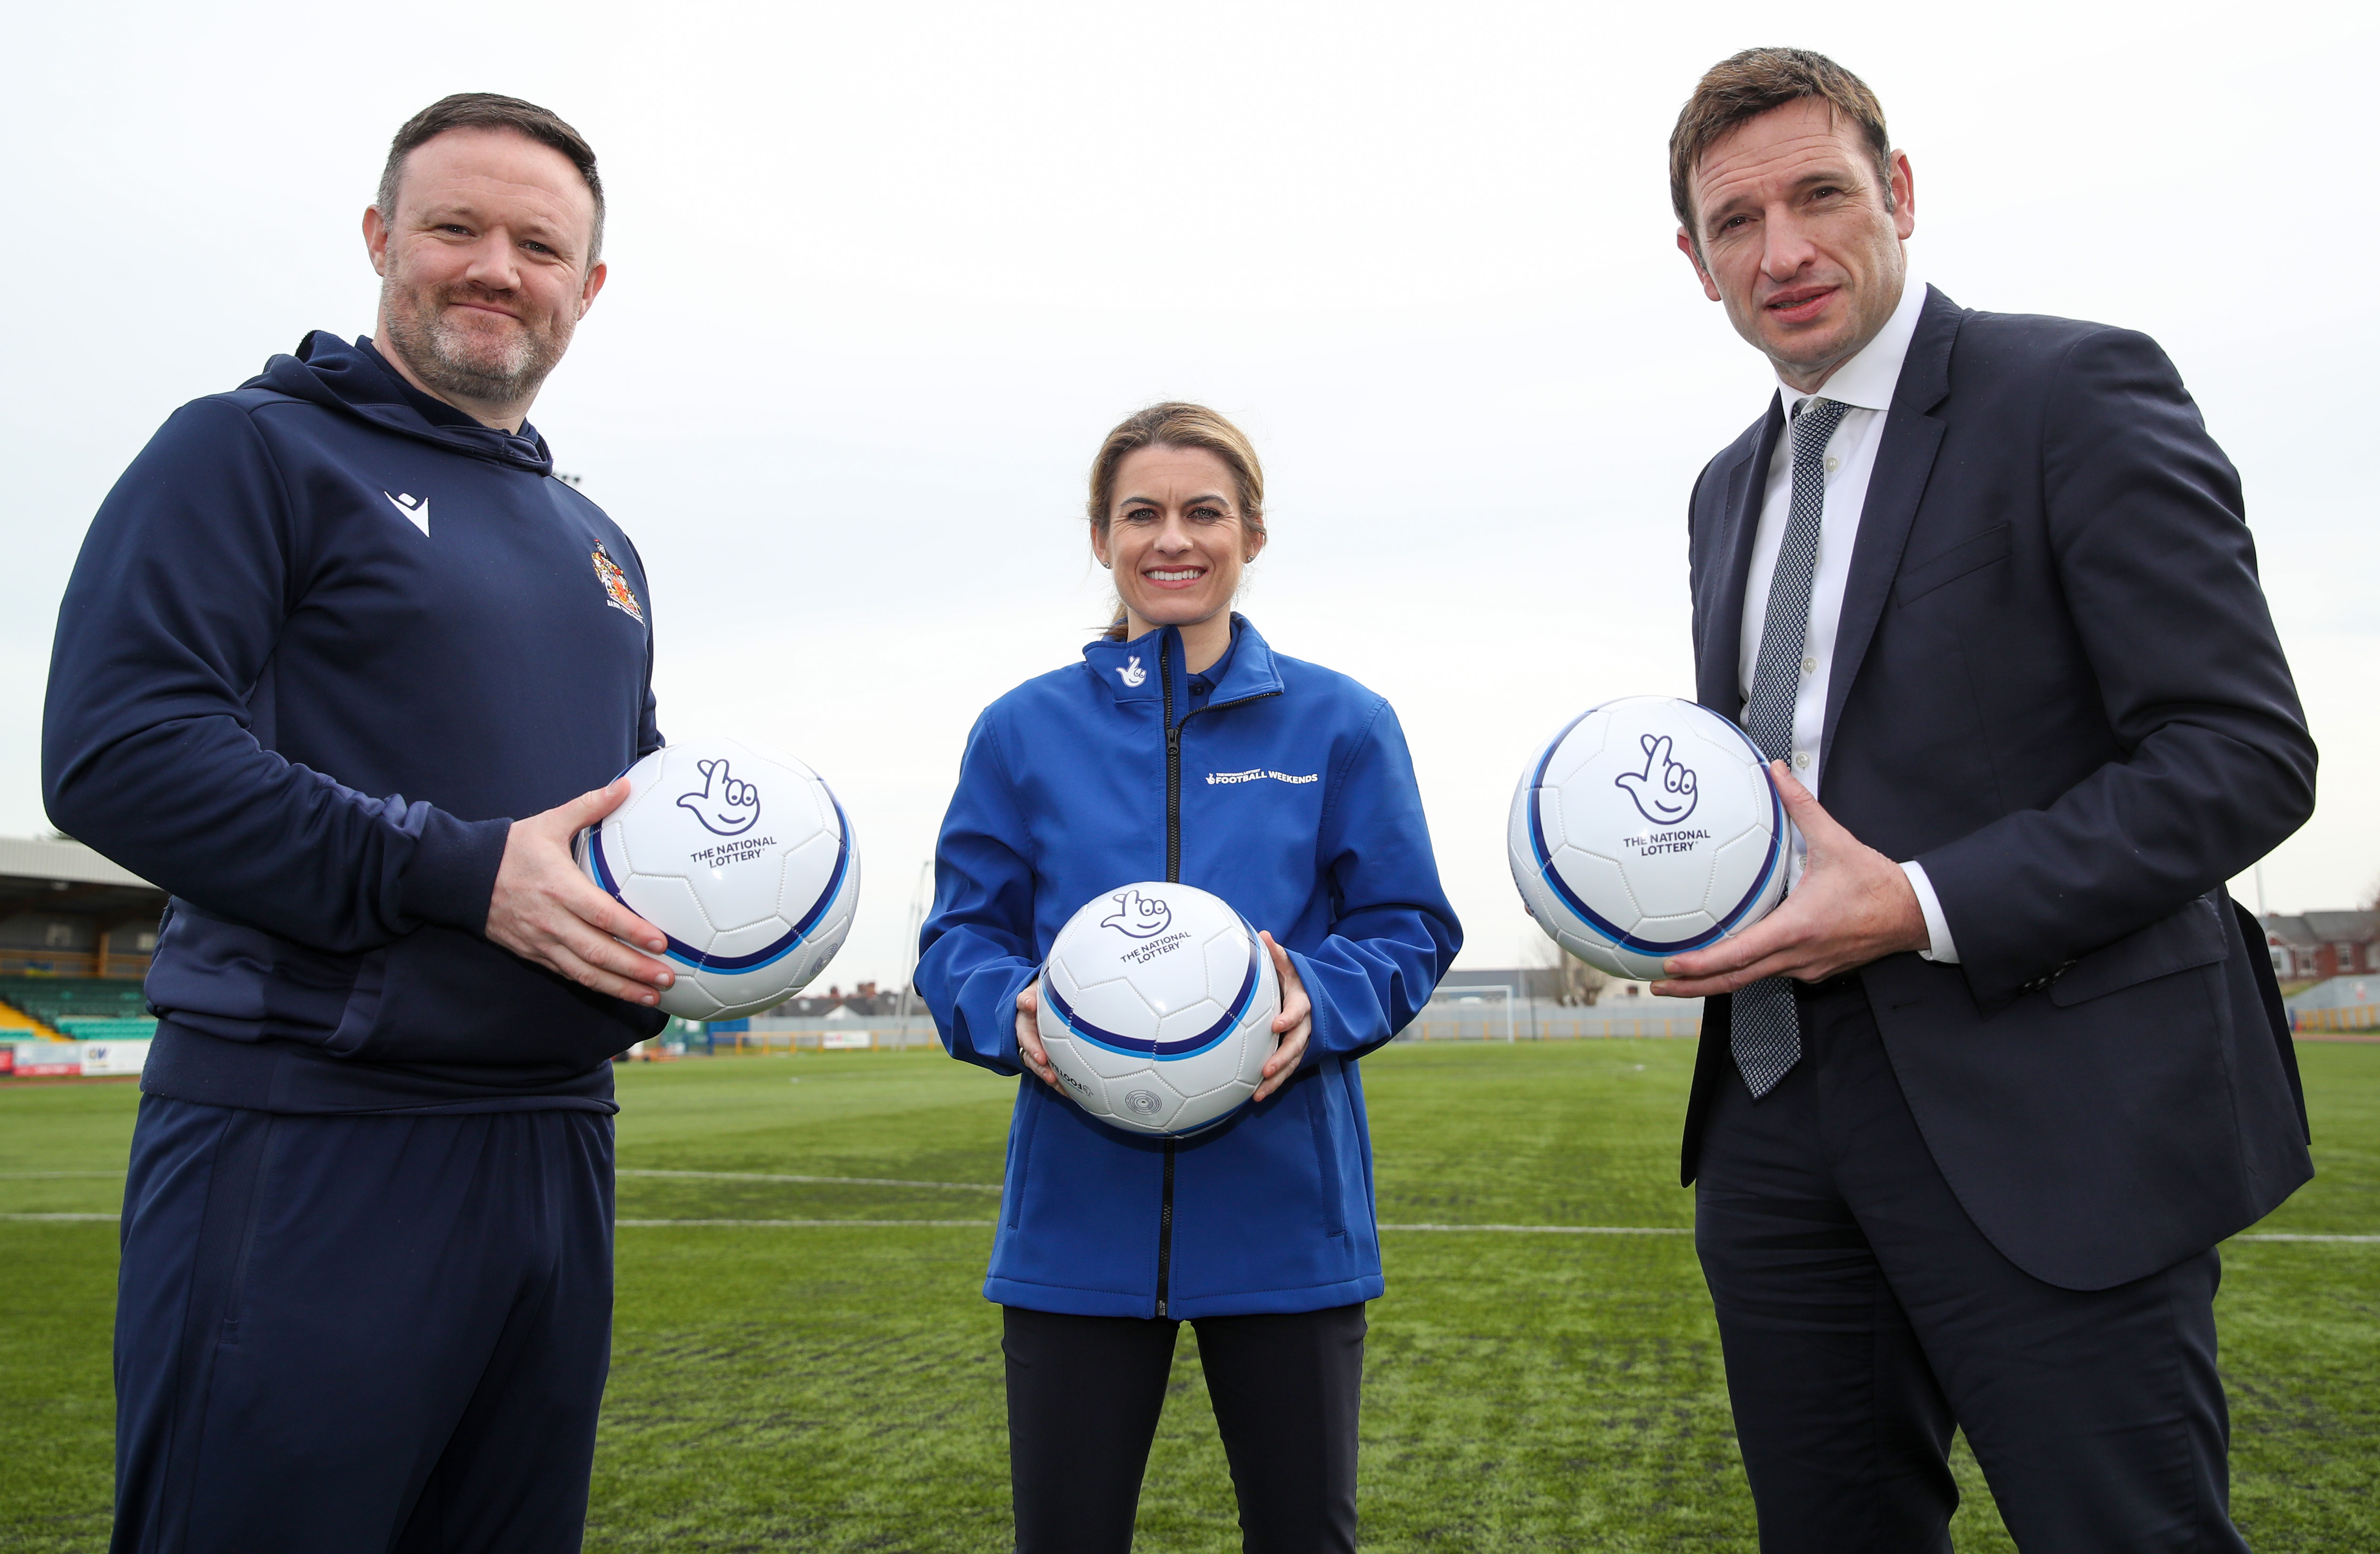 Left to right: Barry Town United Manager Gavin Chesterfield, Karen Carney MBE, FAW Chief Executive Noel Mooney